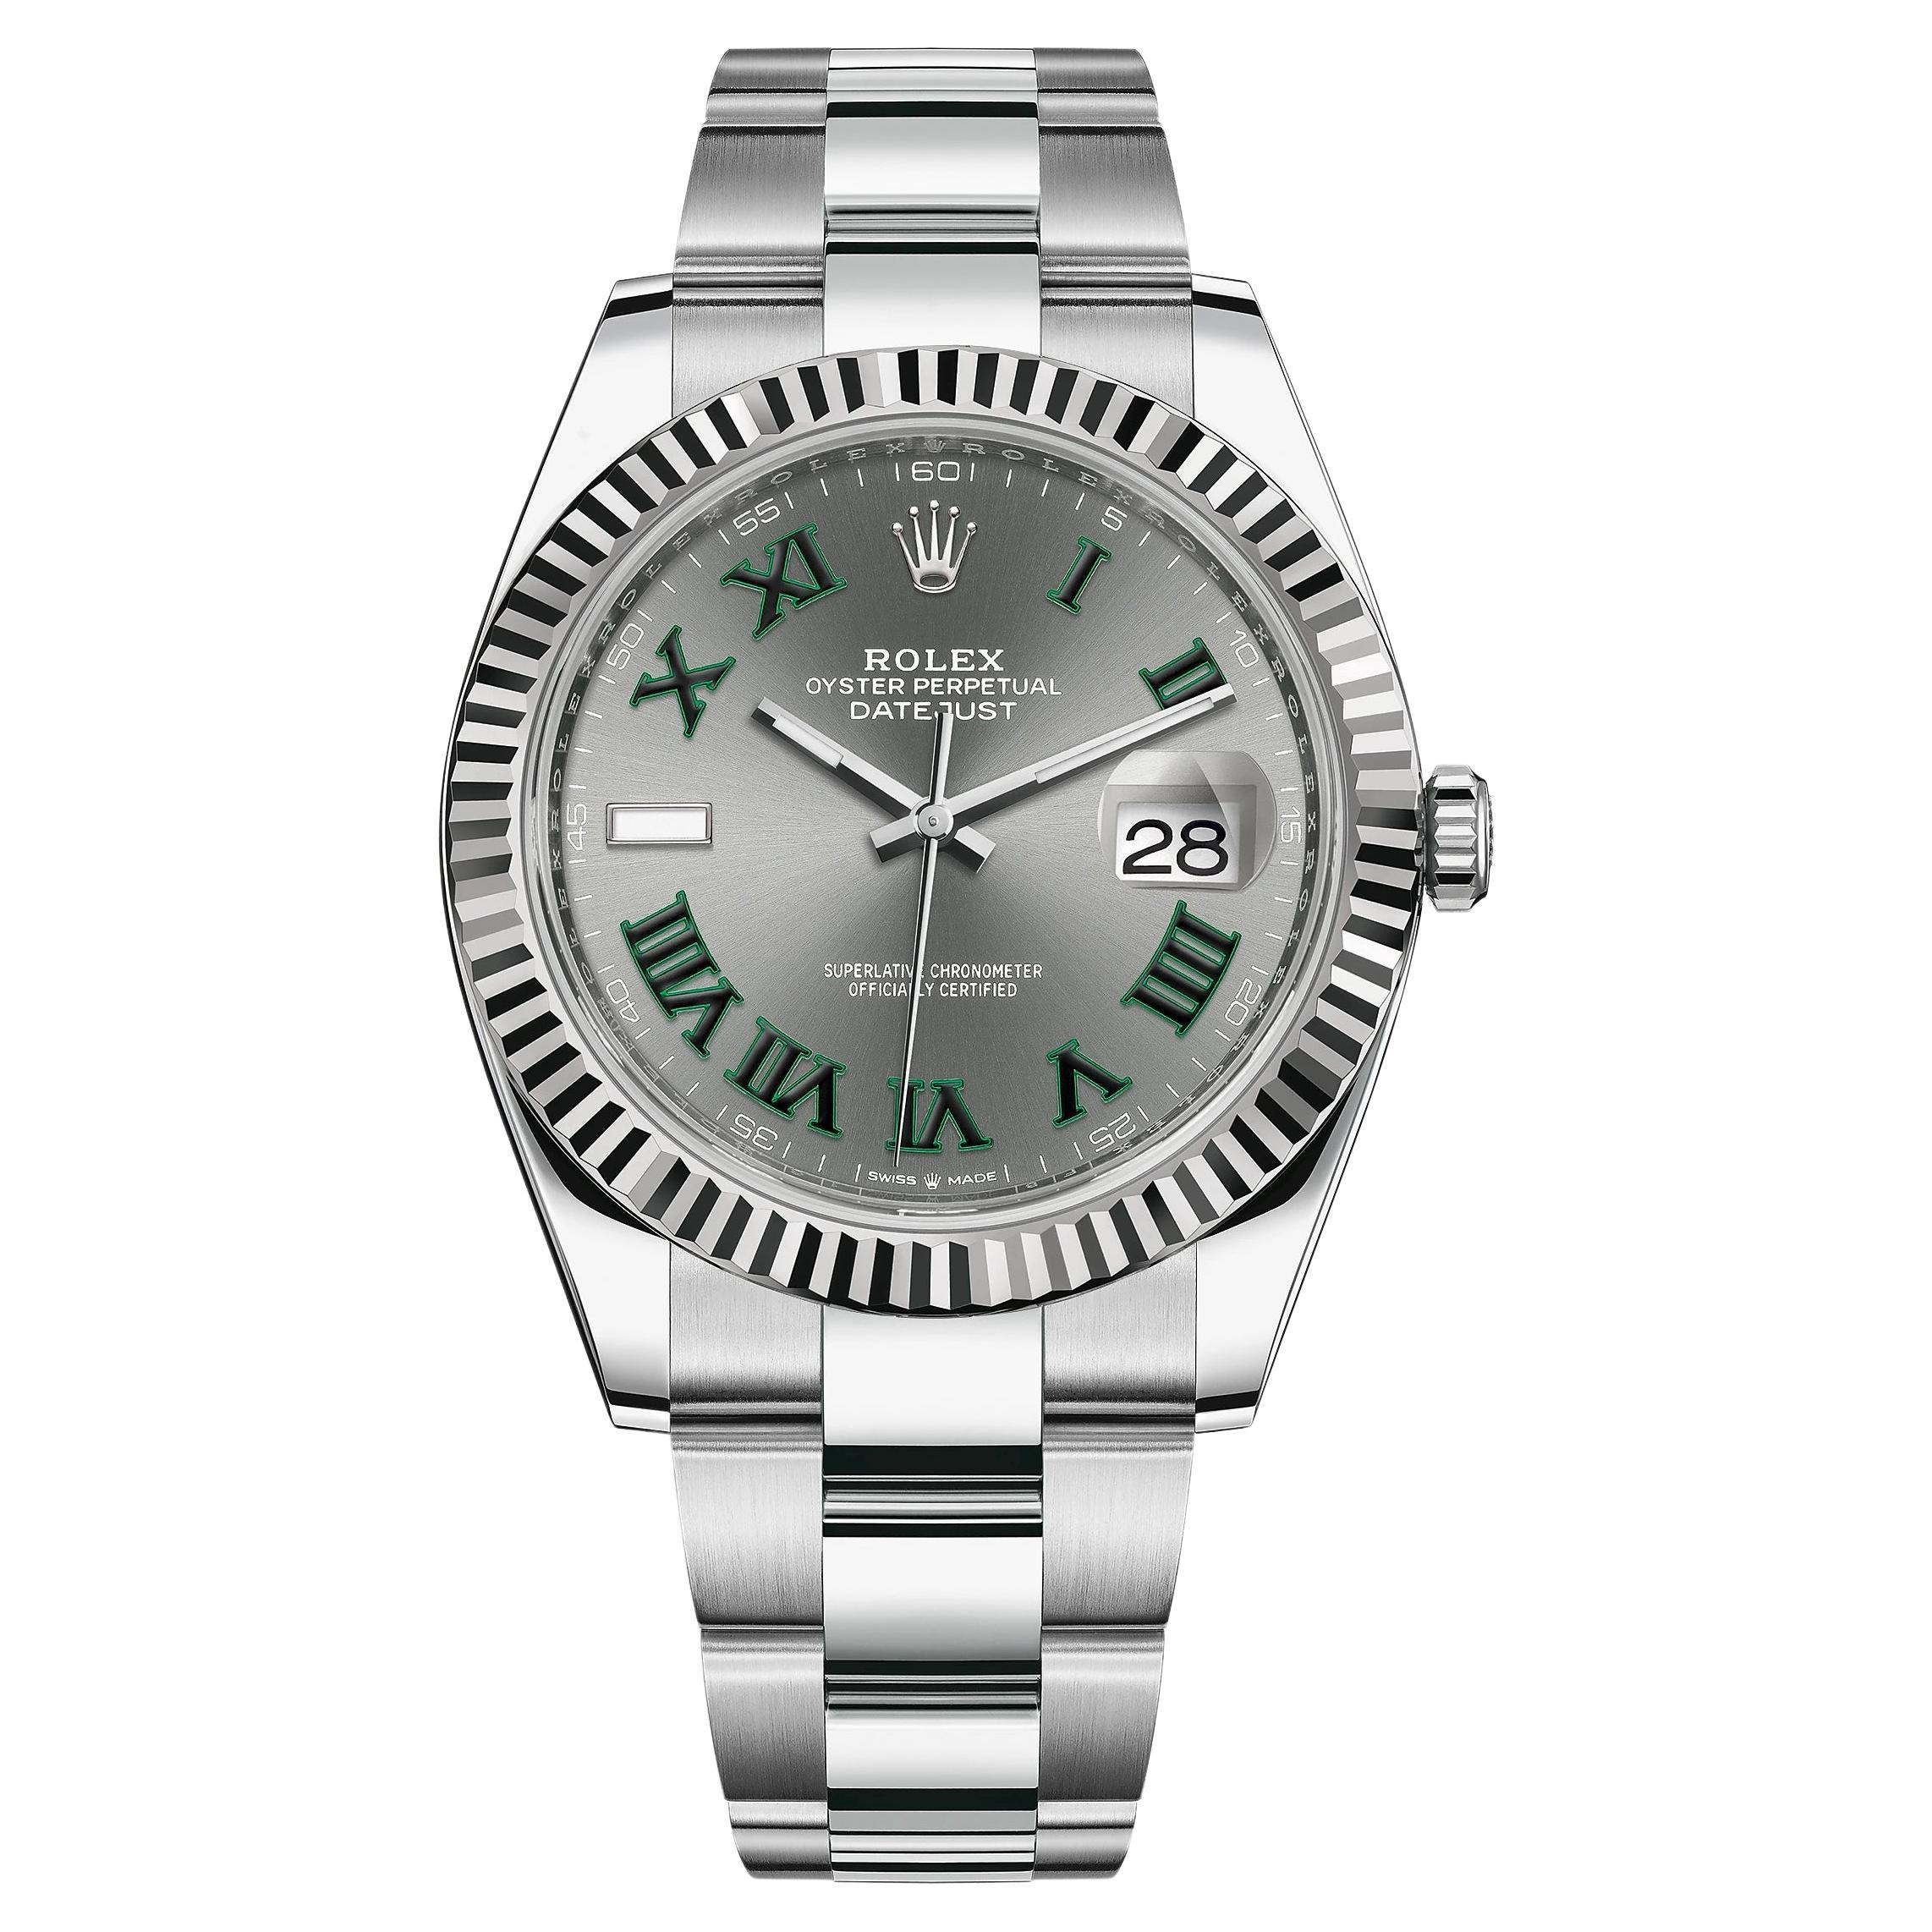 Rolex Datejust, Wimbledon, Oyster, Fluted, 126334, Unworn Watch, Complete 2022 For Sale